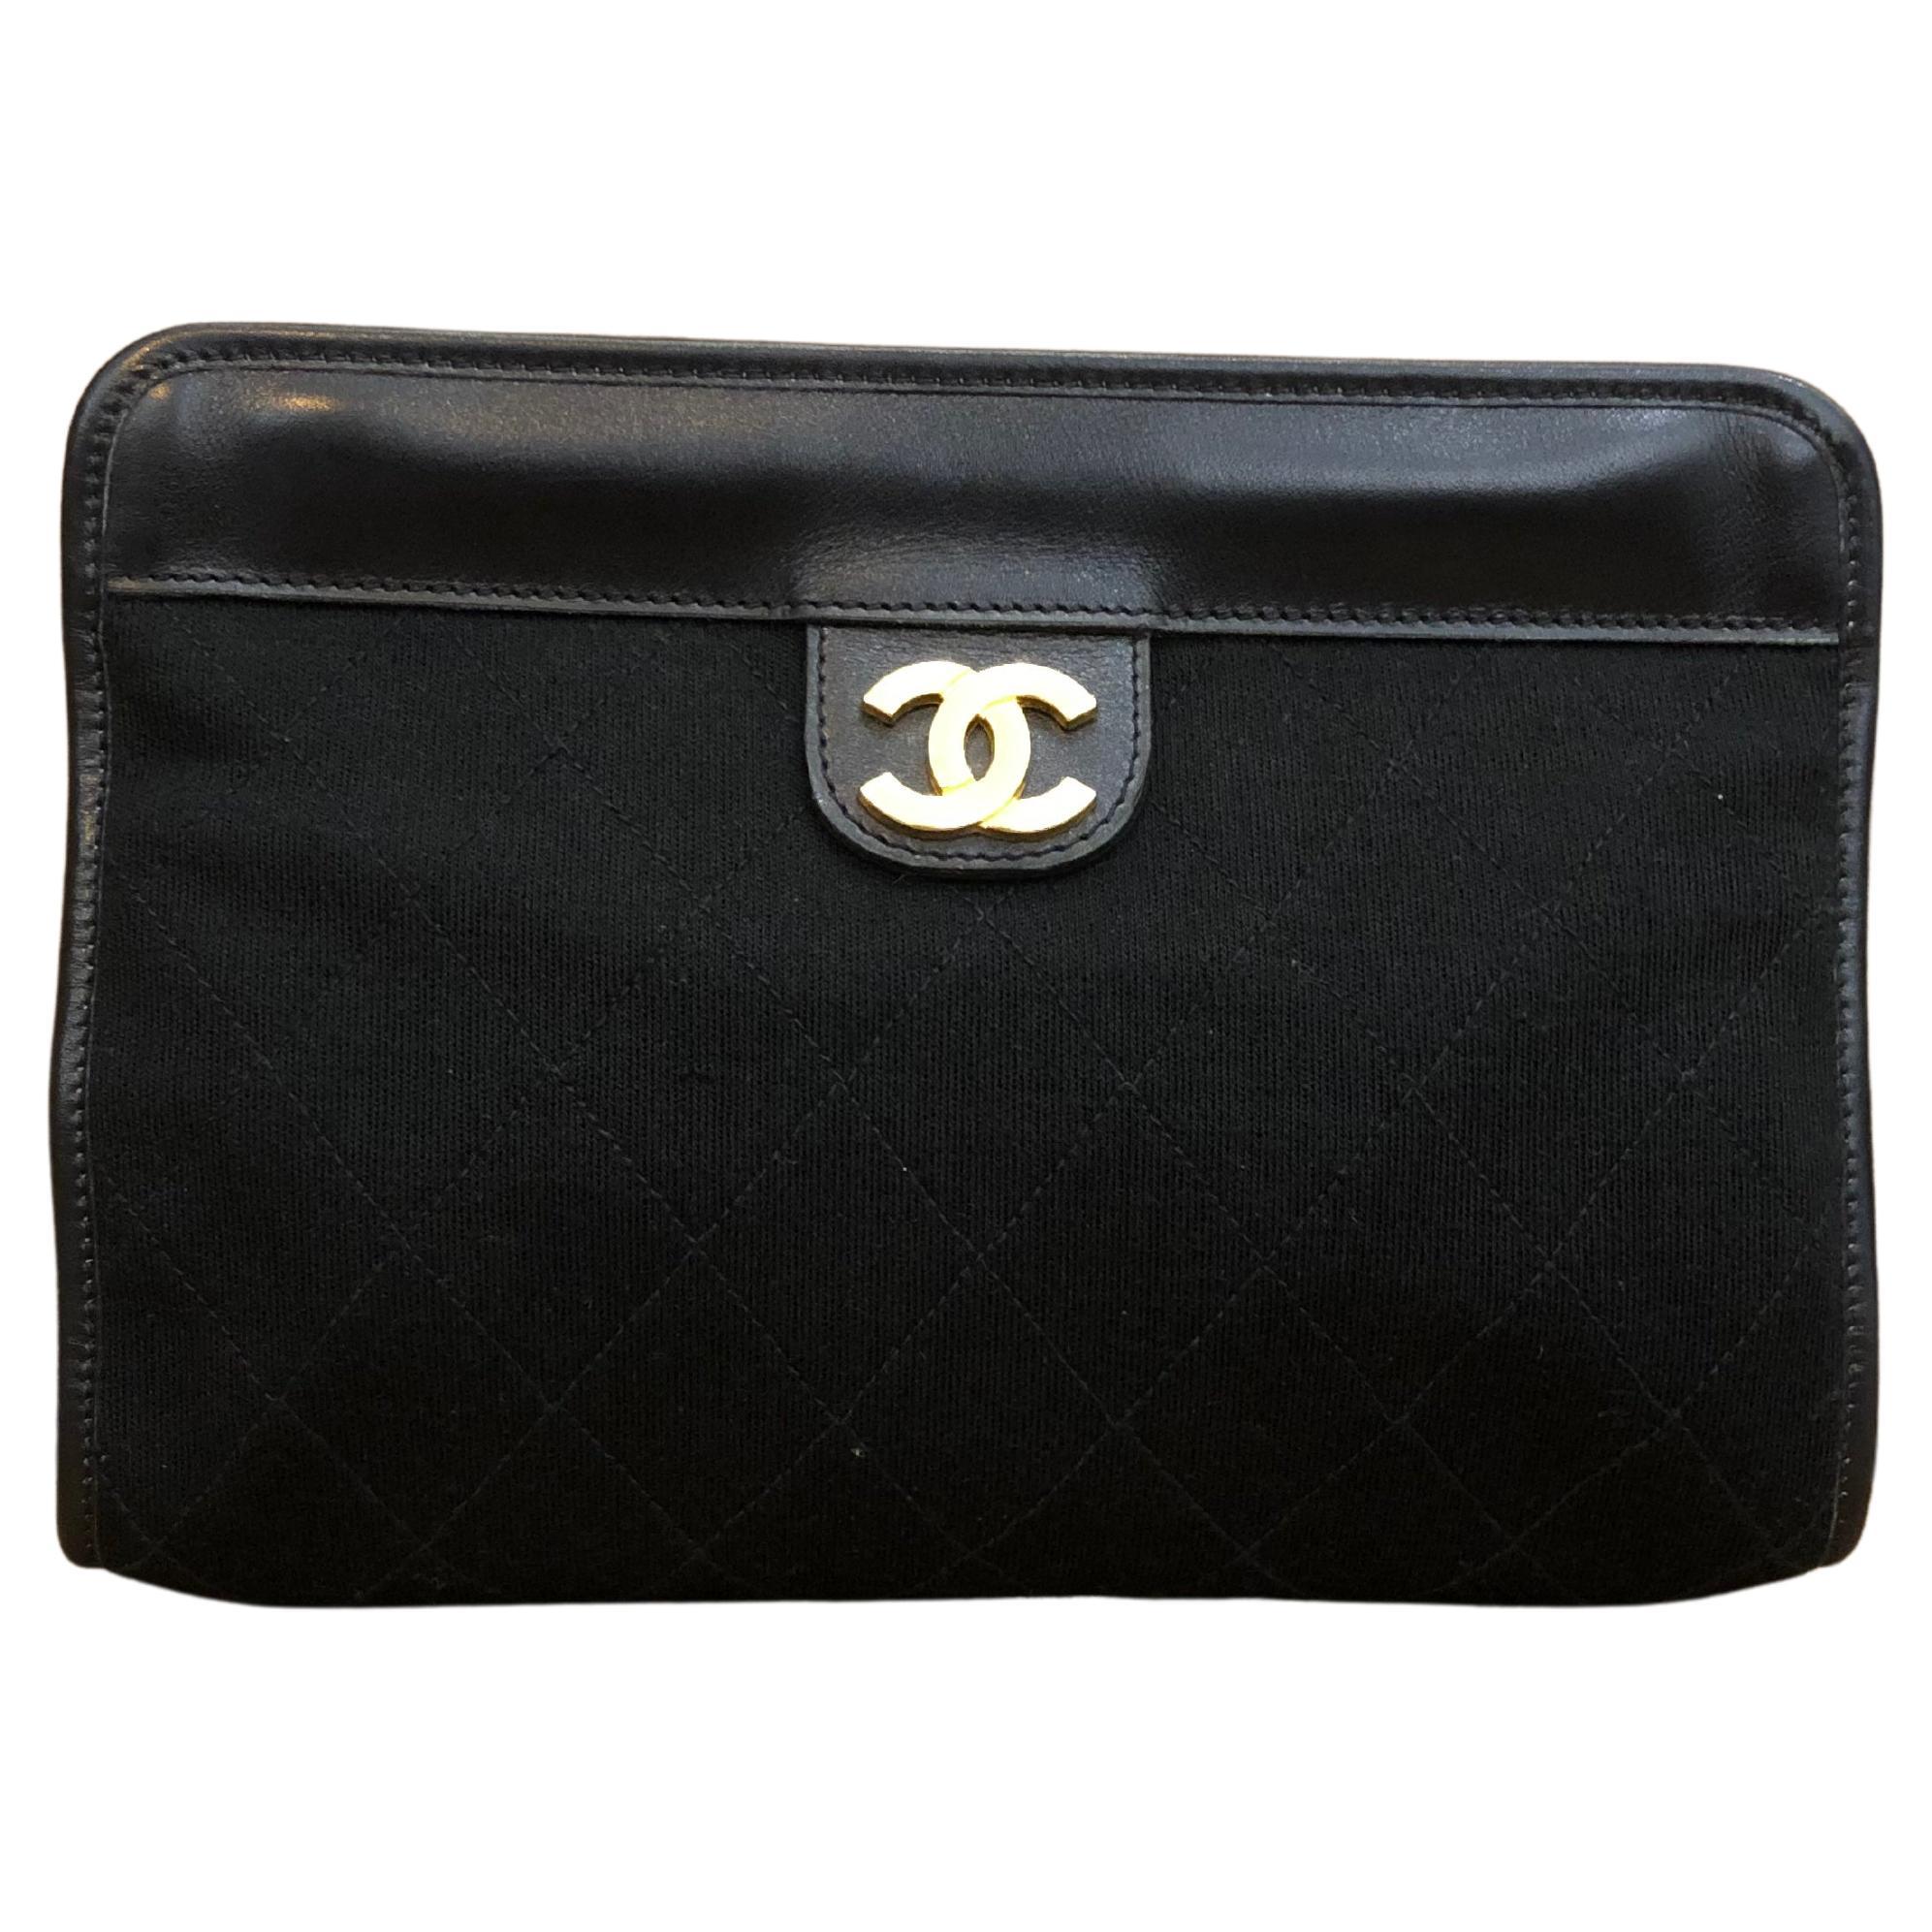 Vintage CHANEL Diamond Quilted Jersey Clutch Bag Black Small